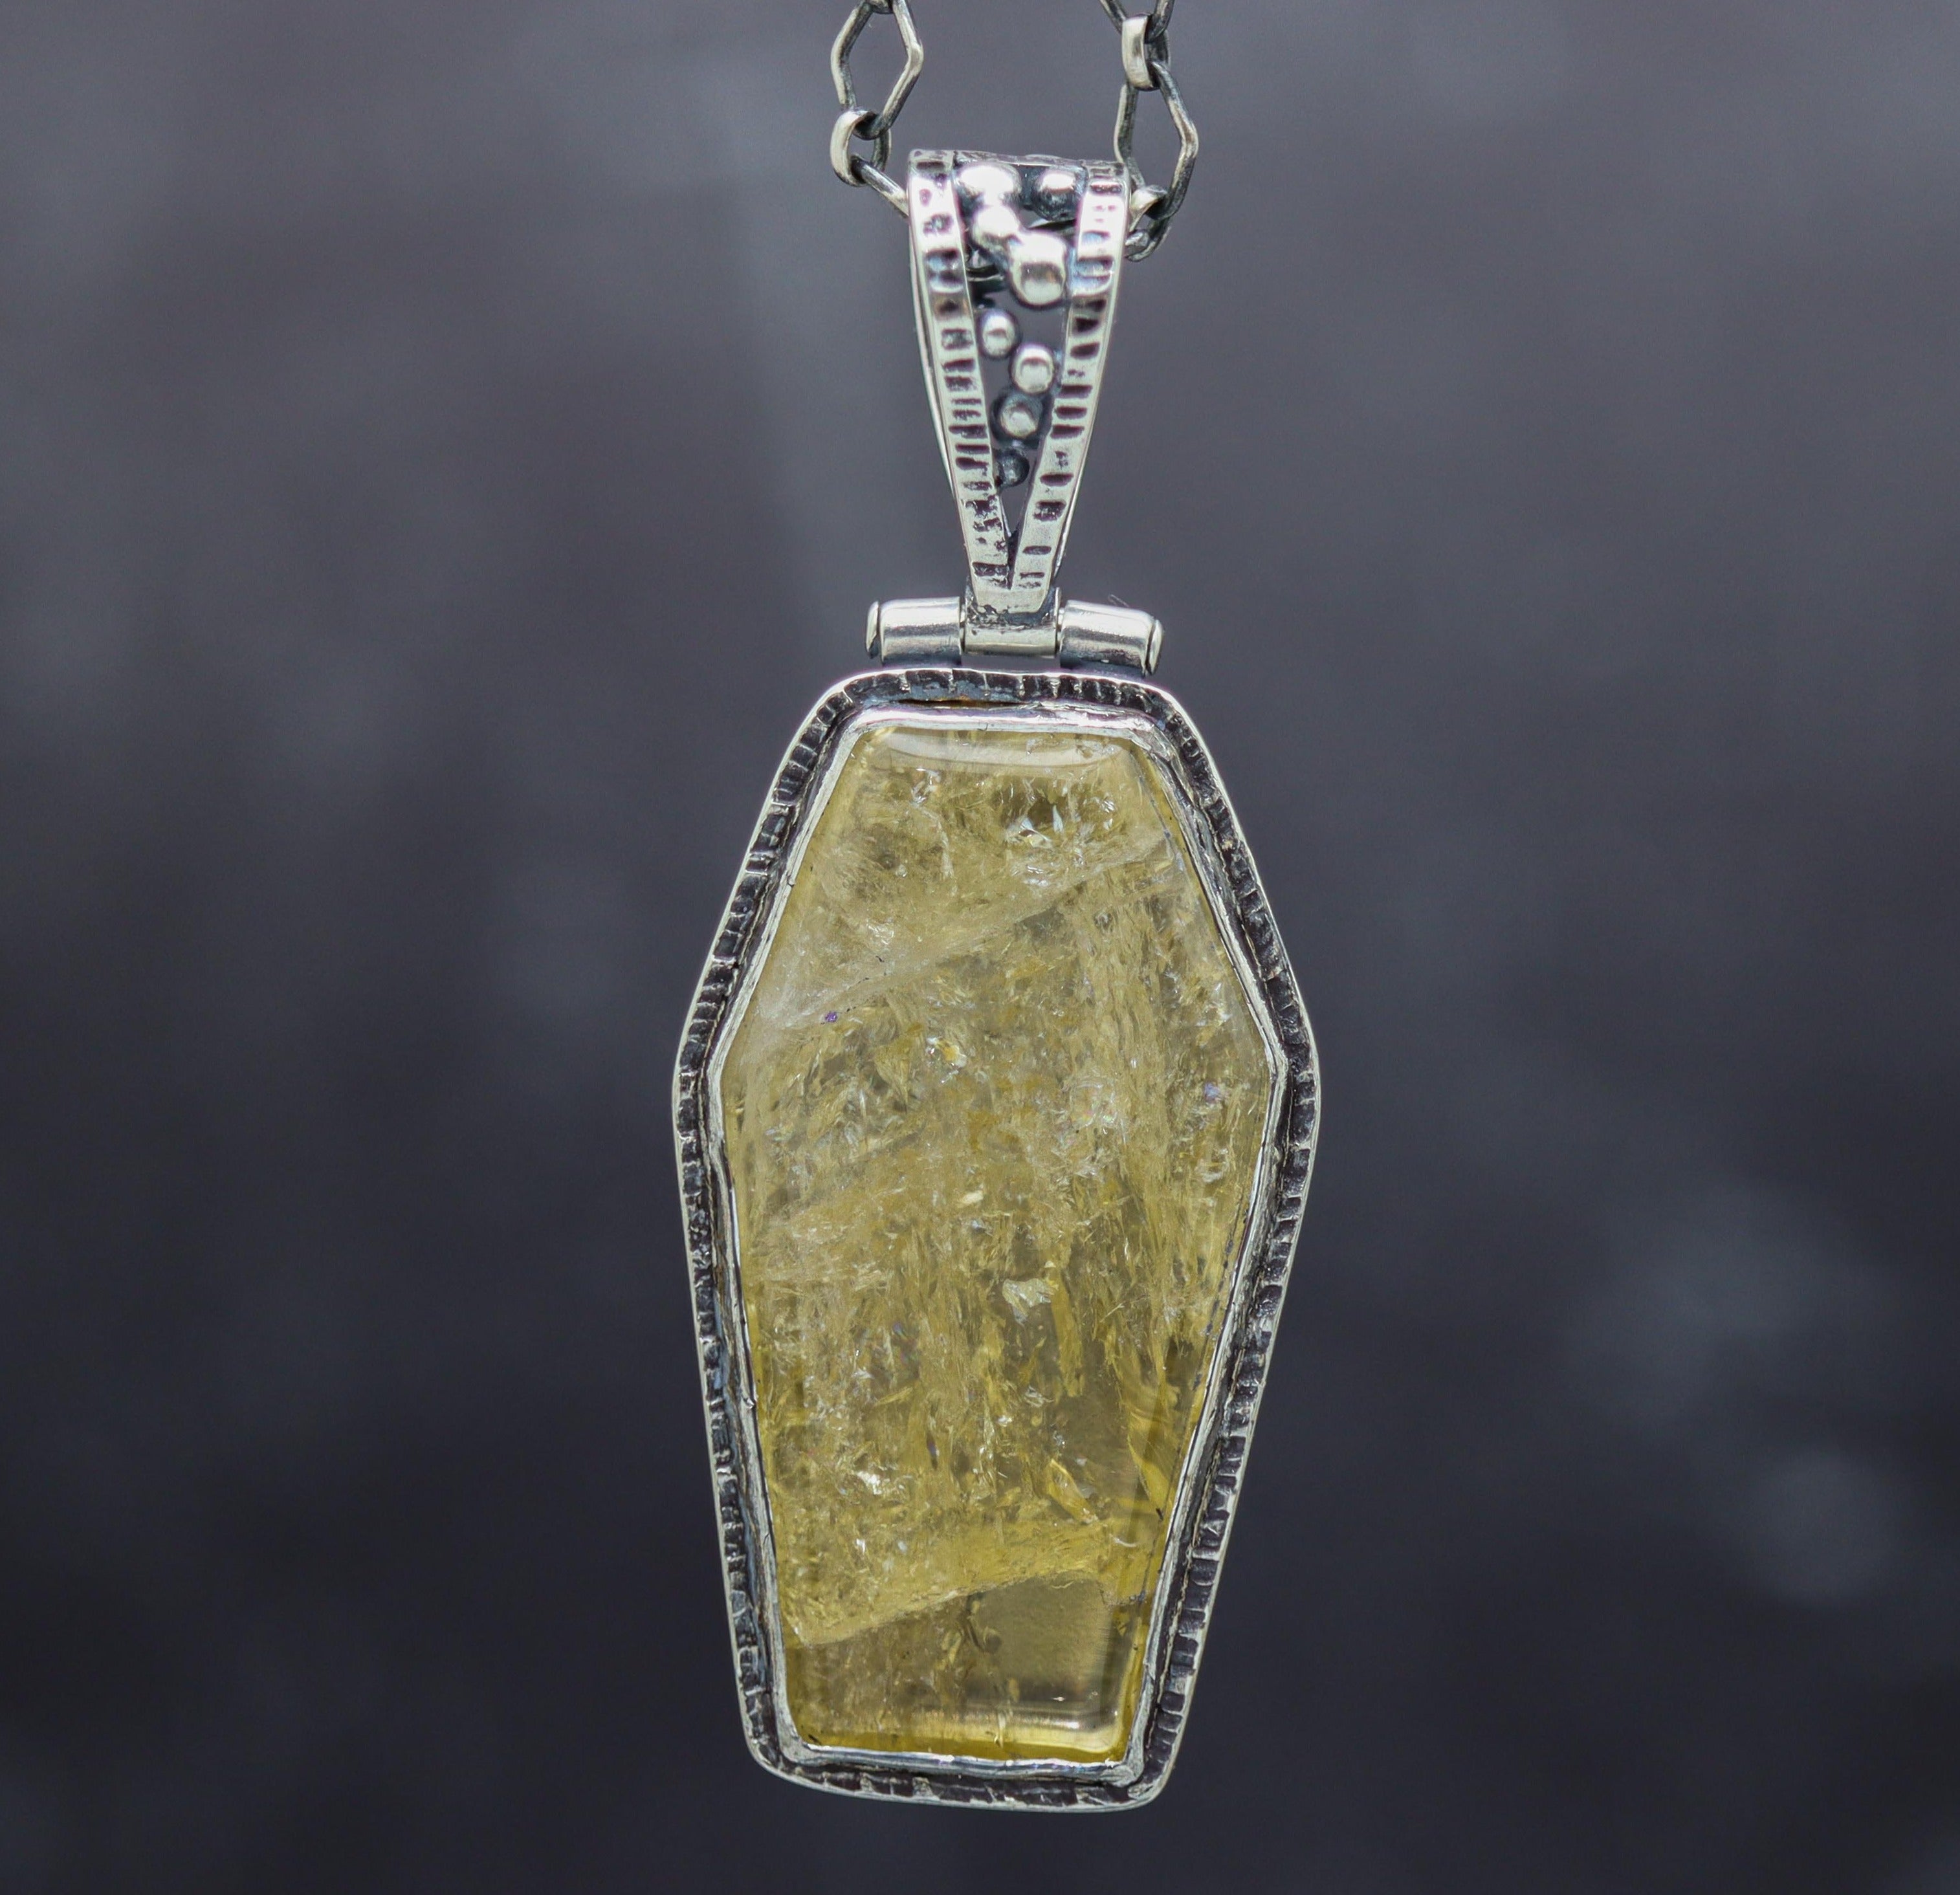 *ON SALE* Citrine Pendant Sterling Silver One Of a Kind Gemstone Necklace